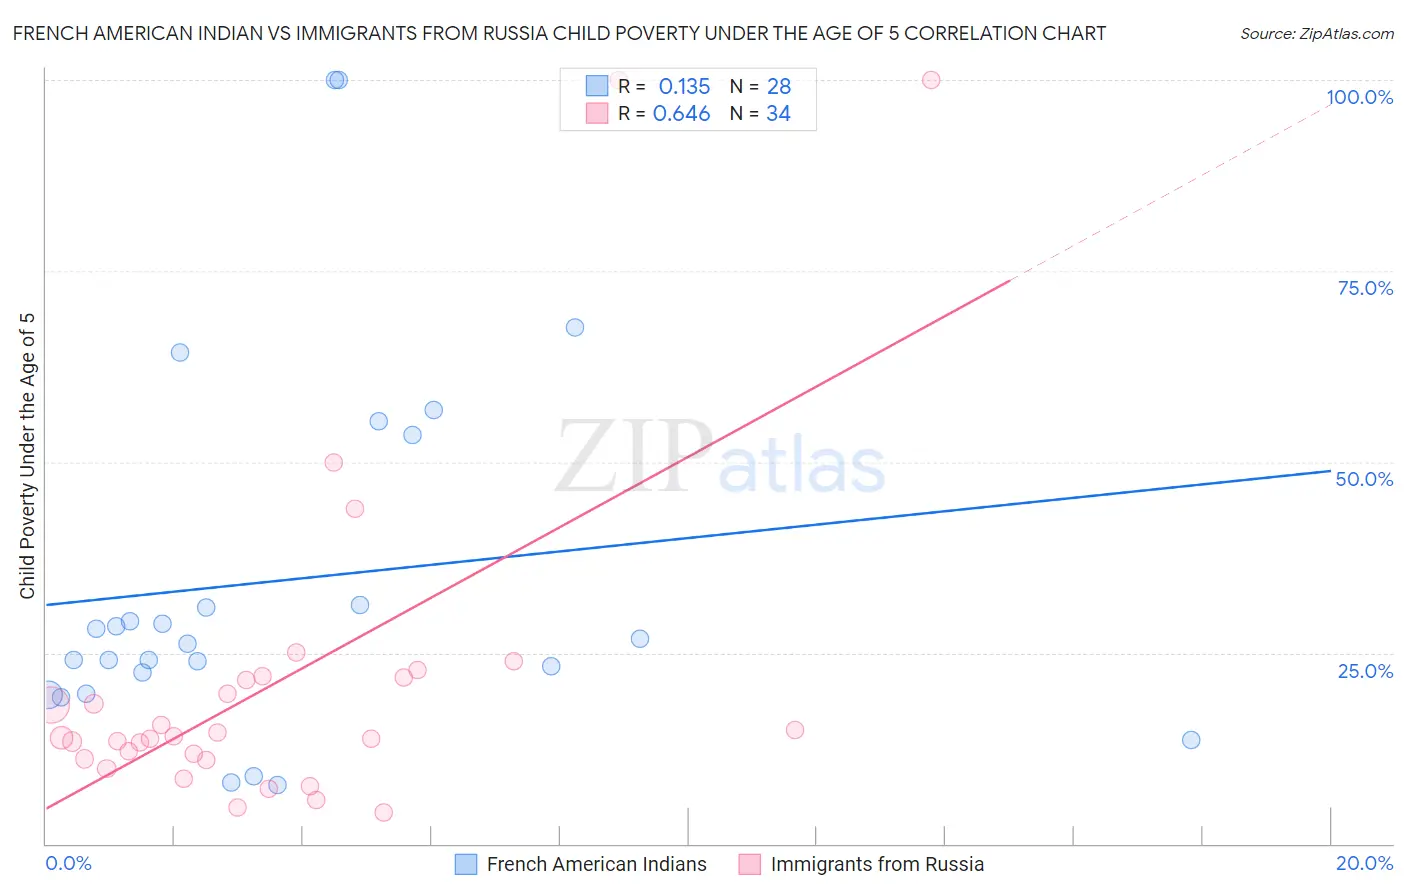 French American Indian vs Immigrants from Russia Child Poverty Under the Age of 5